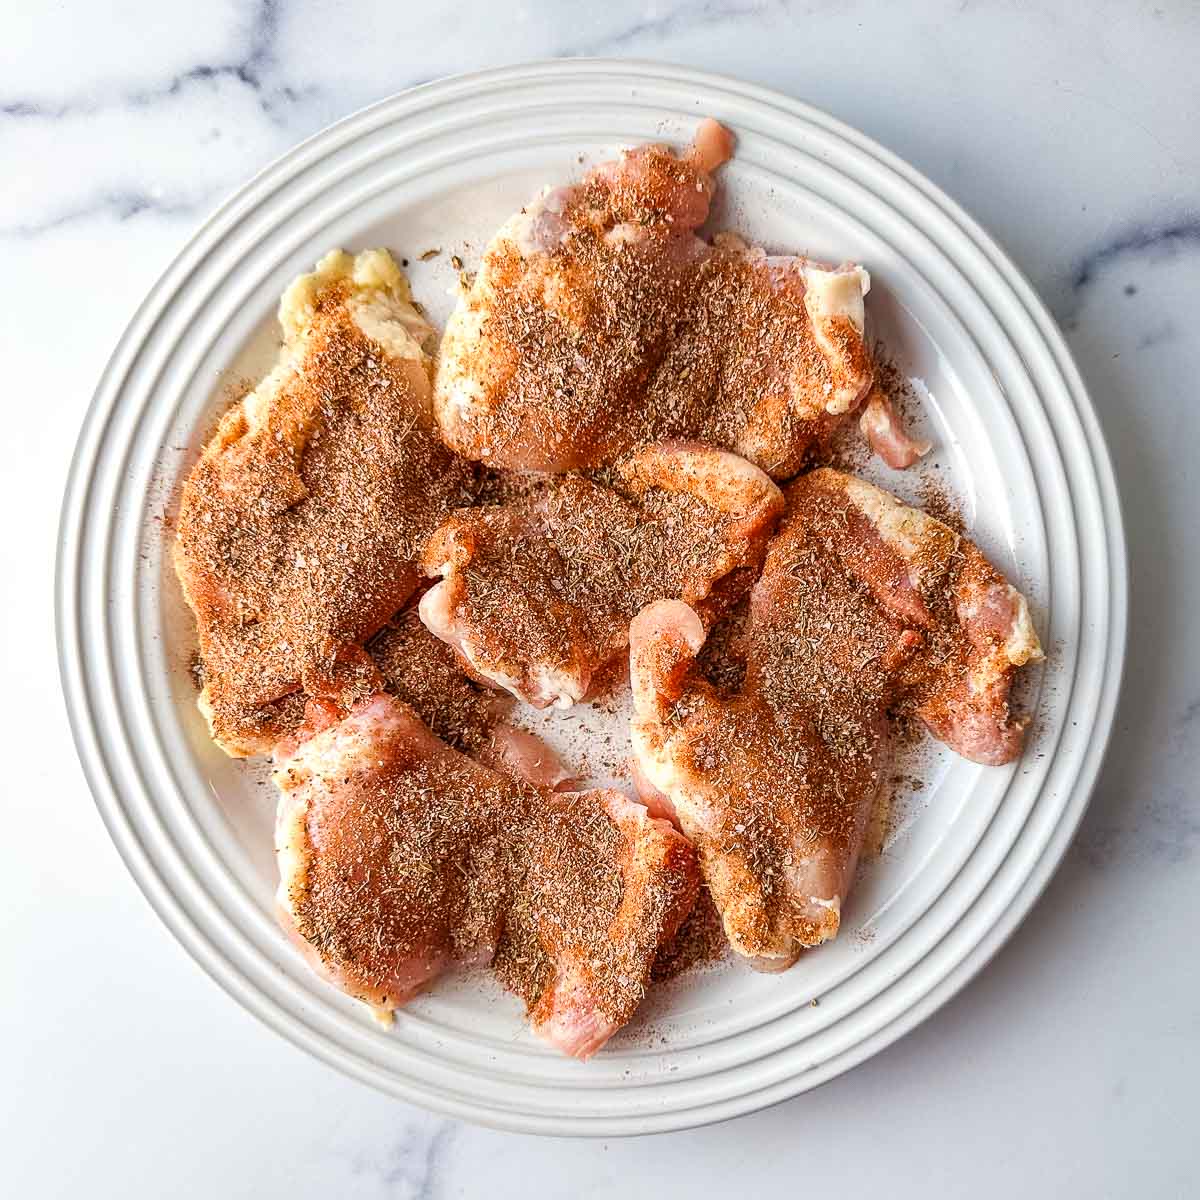 Seasoned chicken thighs on a white plate.